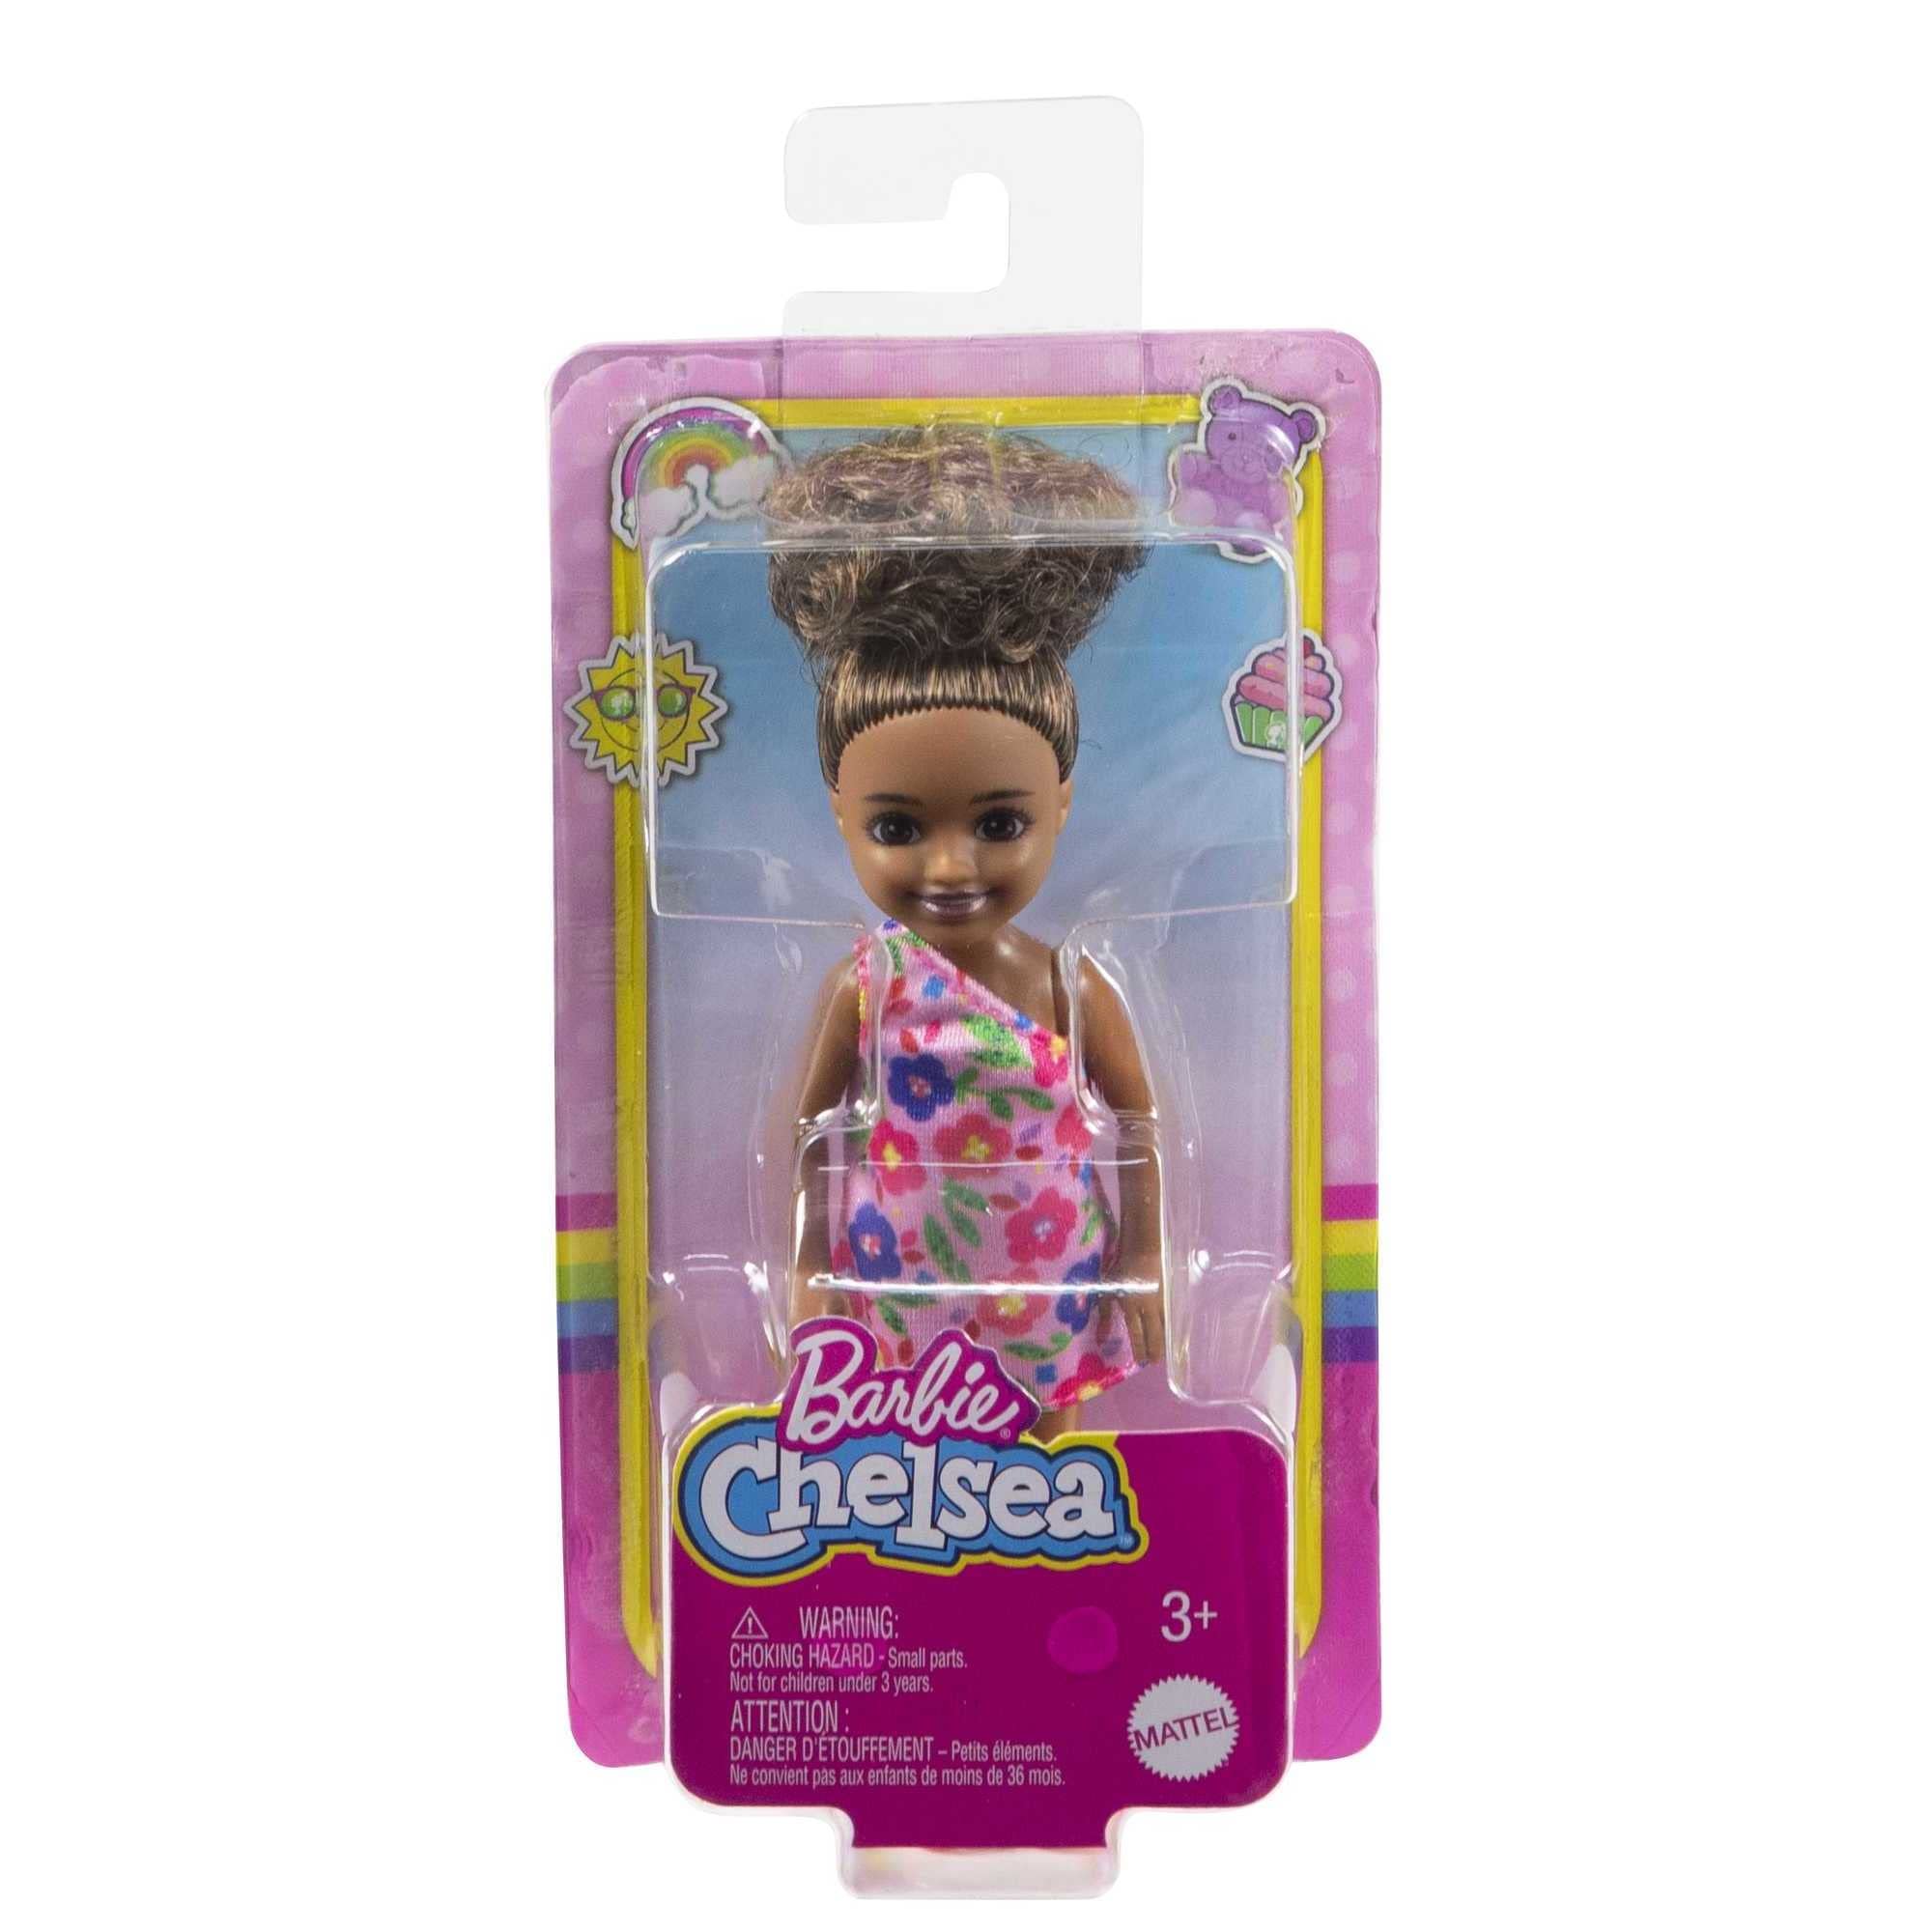 Barbie Chelsea Doll (Brunette Curly Hair) Wearing One-Shoulder Flower-Print Dress and Pink Shoes, Toy for Kids Ages 3 Years Old & Up